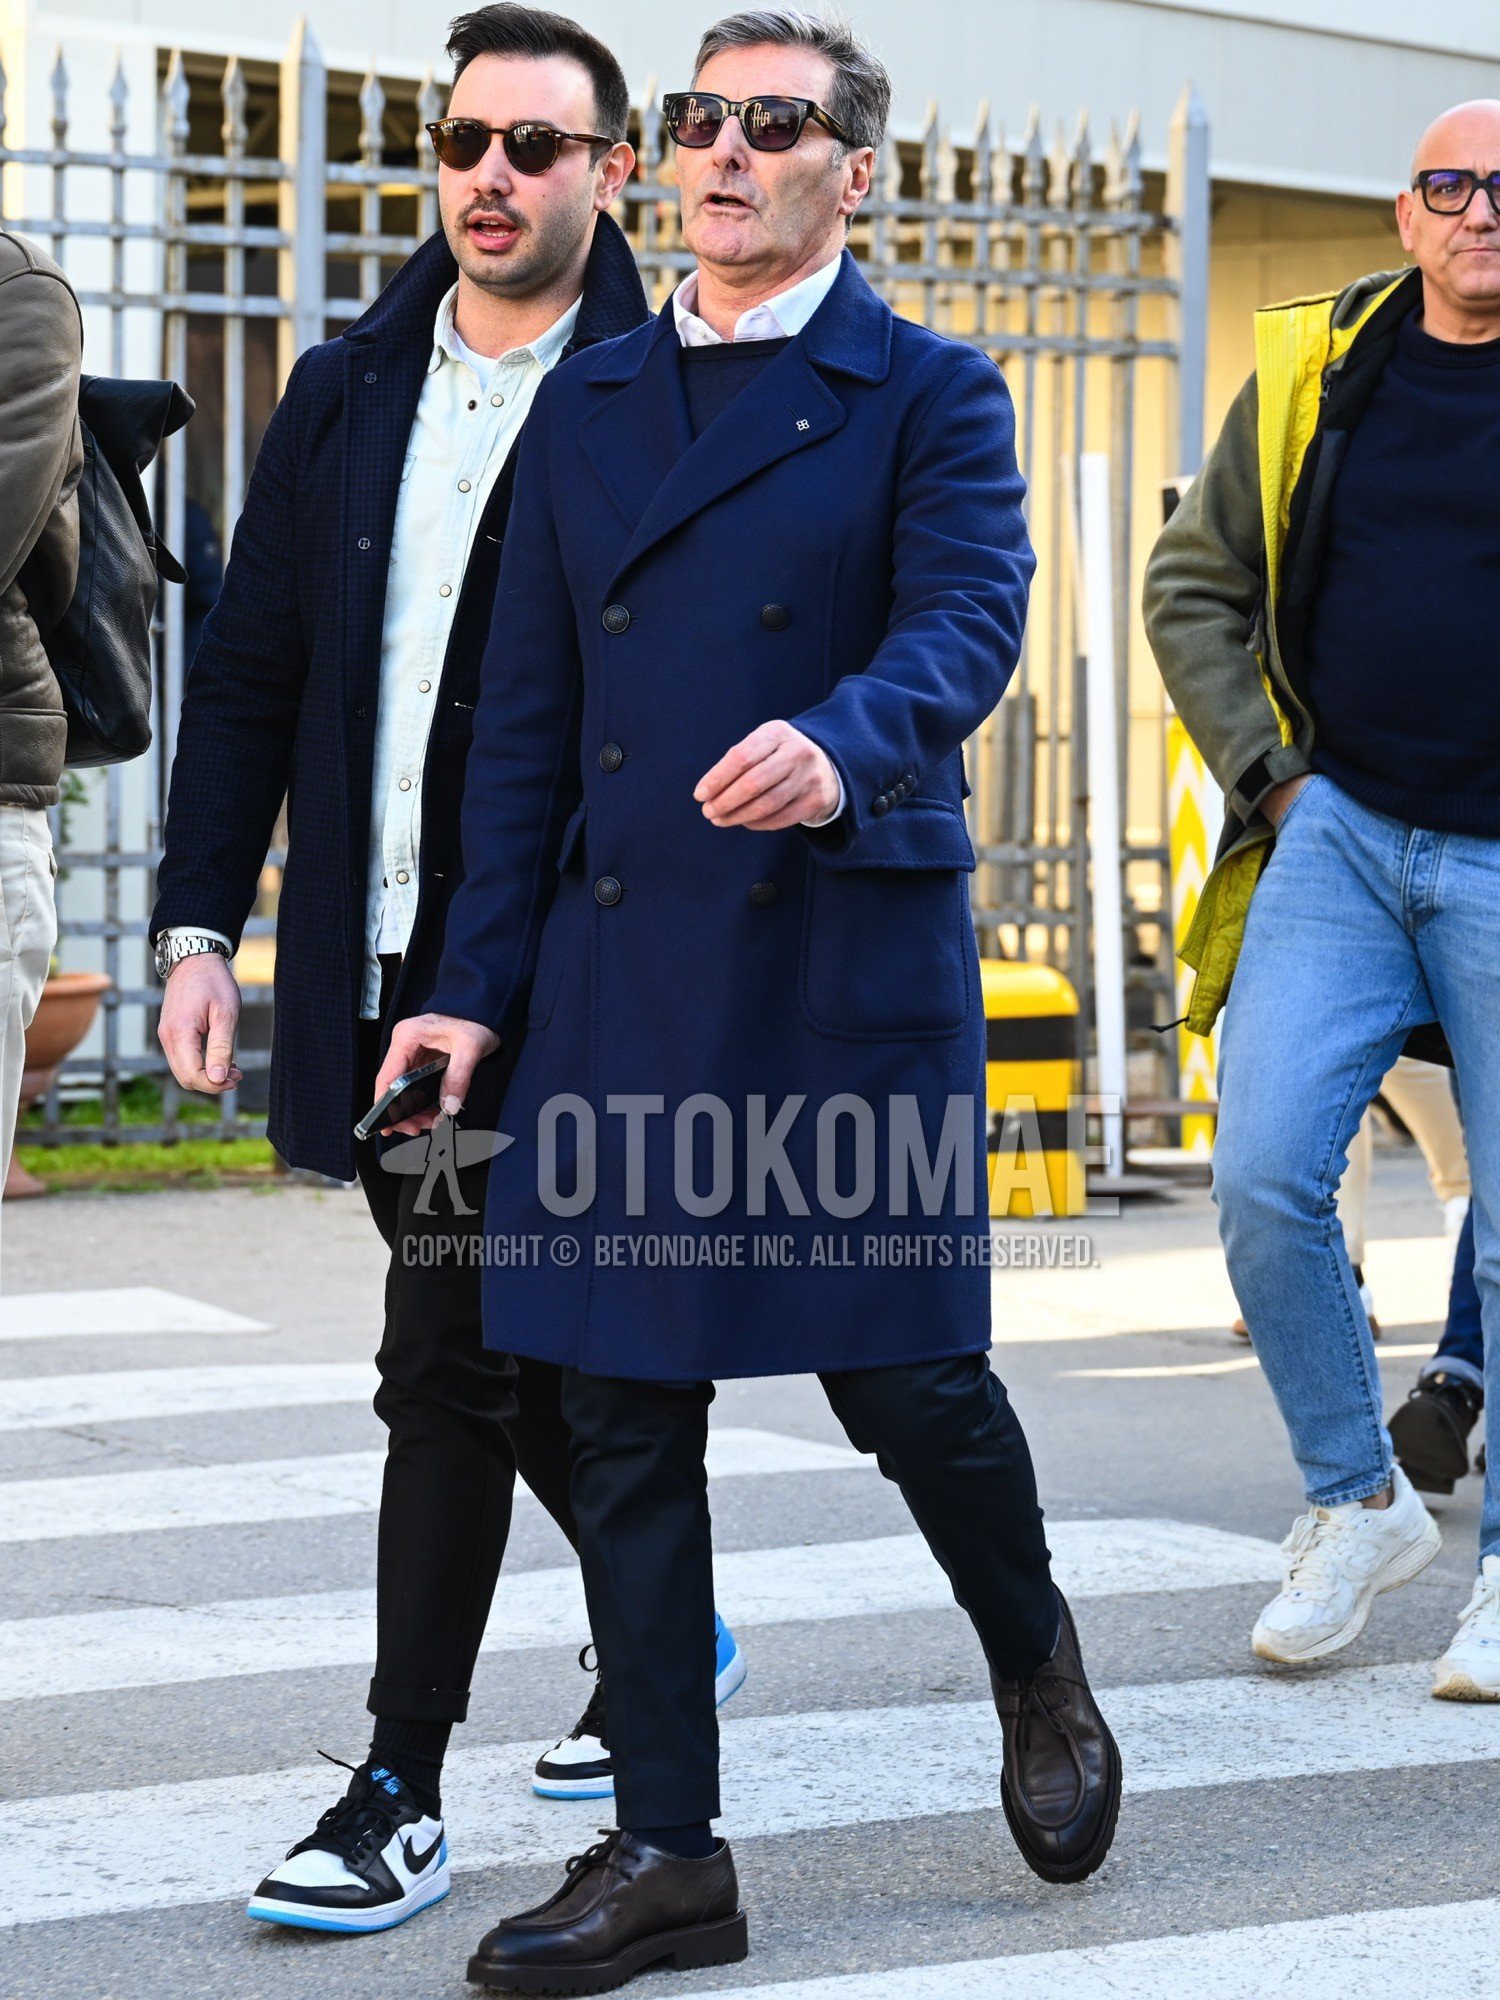 Men's autumn winter outfit with black eyewear sunglasses, navy plain ulster coat, white plain shirt, navy plain sweater, navy plain slacks, black plain socks, brown u-tip shoes leather shoes.